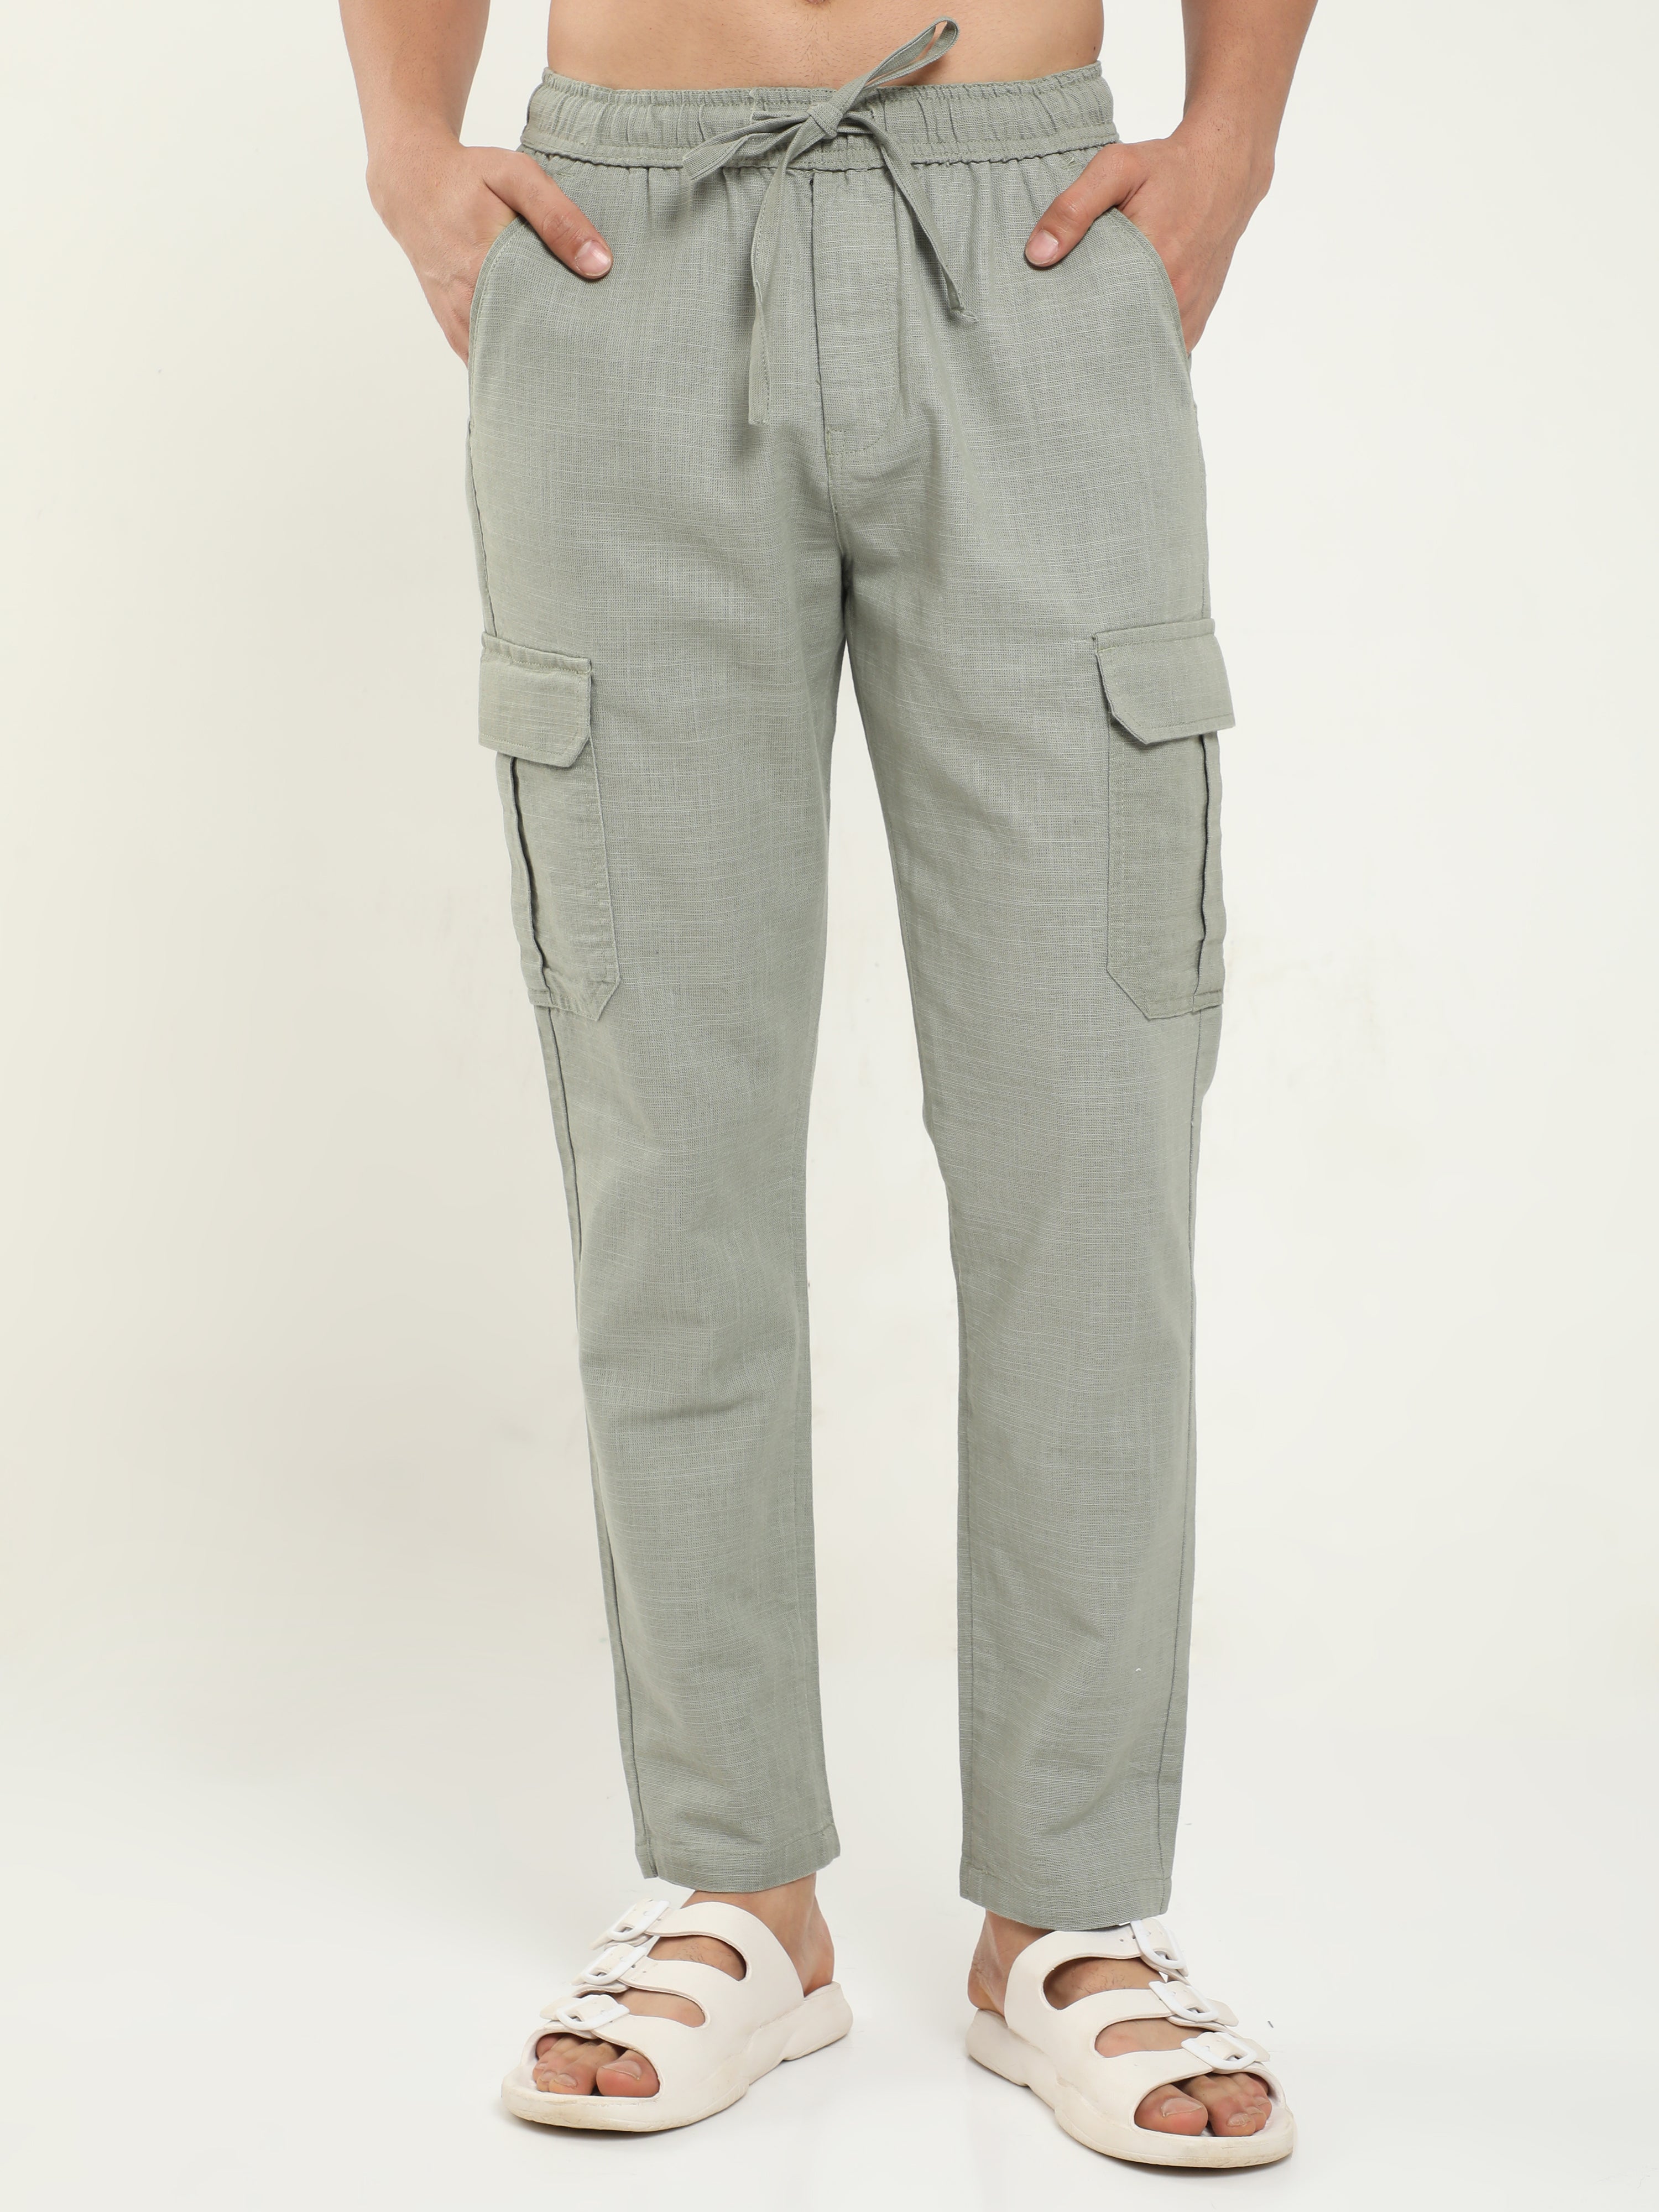 Share more than 148 gents linen trousers super hot